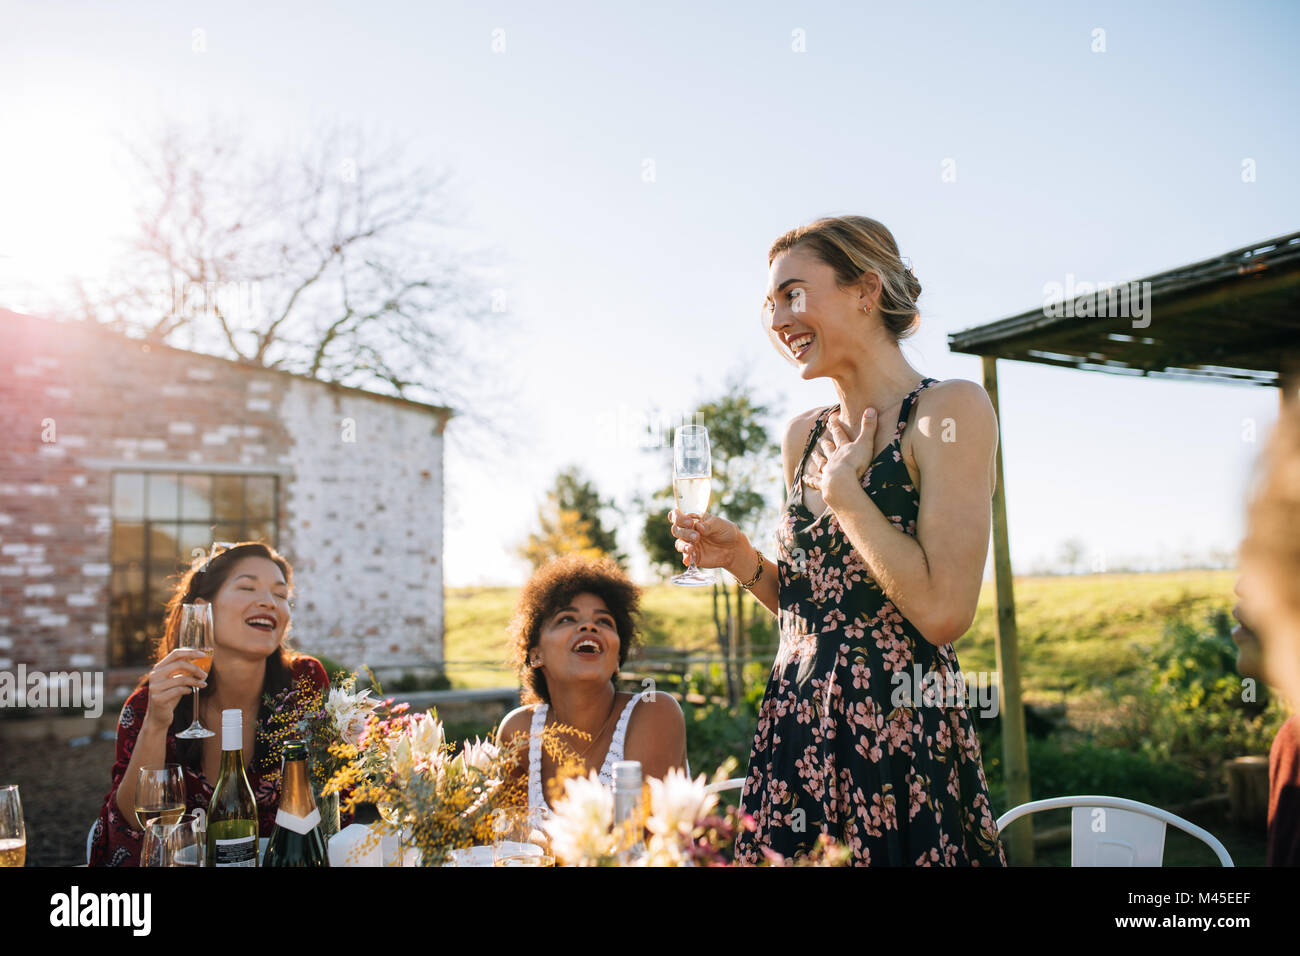 Overwhelmed woman sharing good news with friends at garden restaurant. Friends celebrating a special occasion at outdoor summer party. Stock Photo